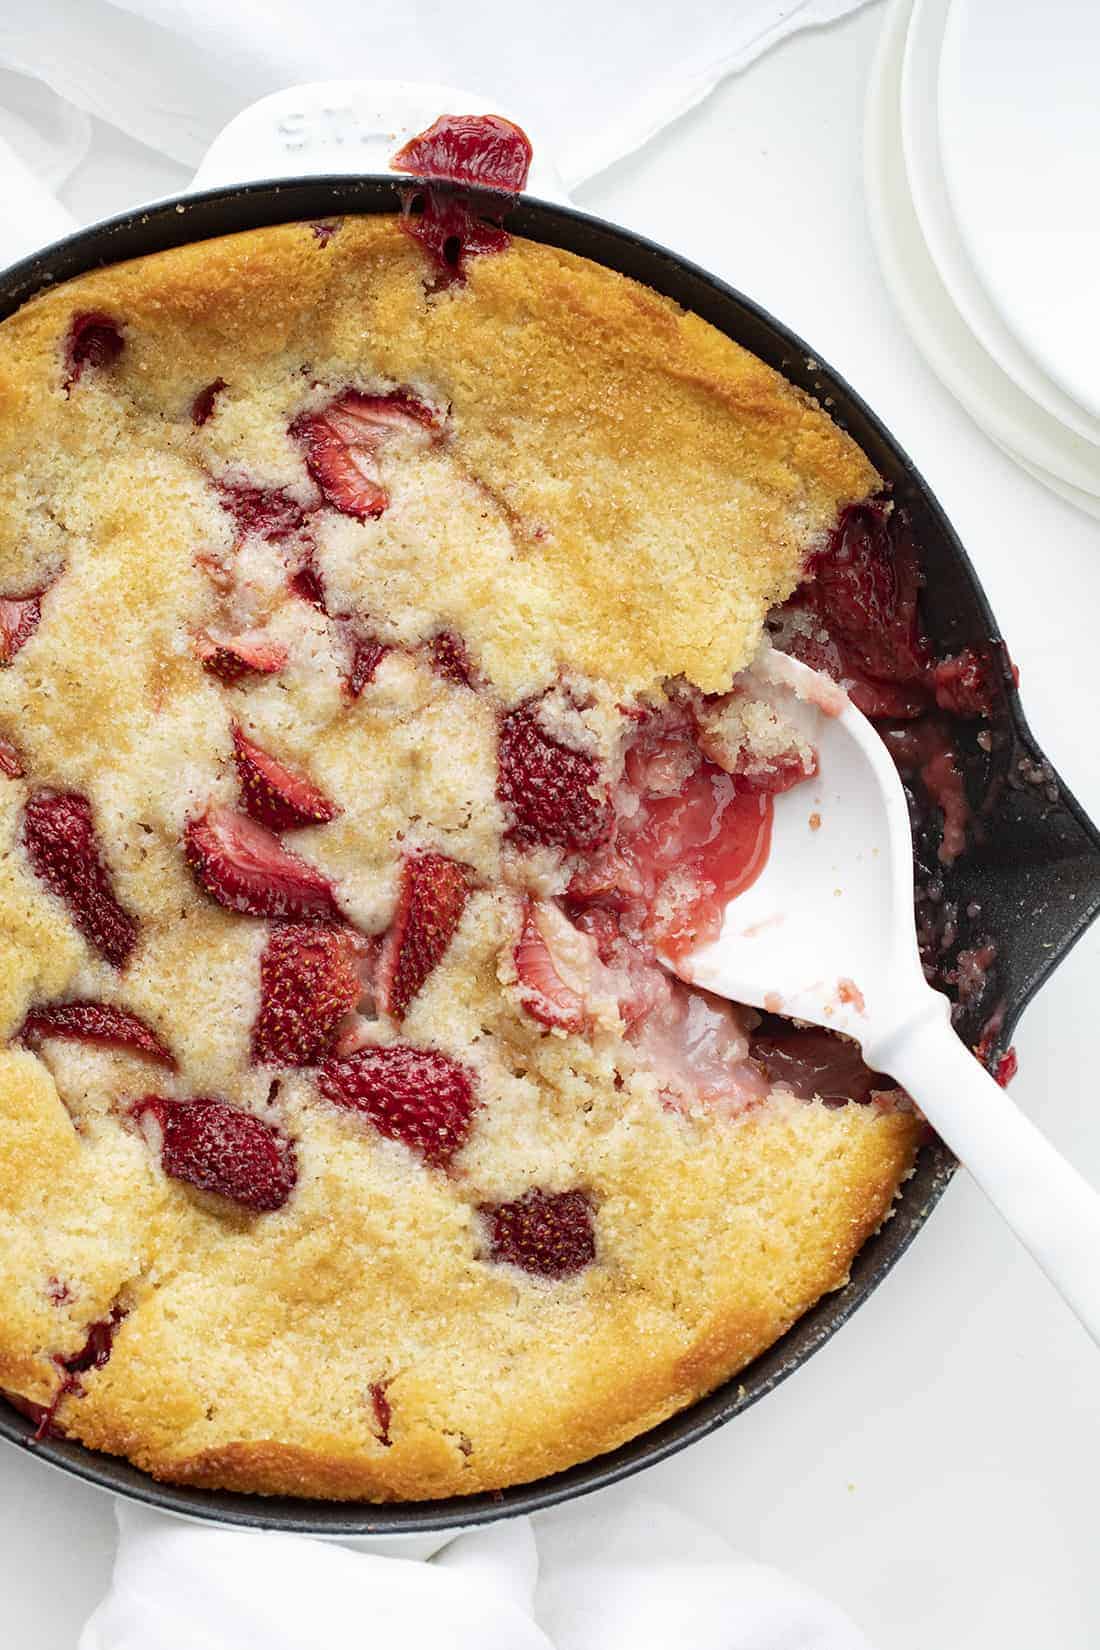 Skillet with Strawberry Cobbler 